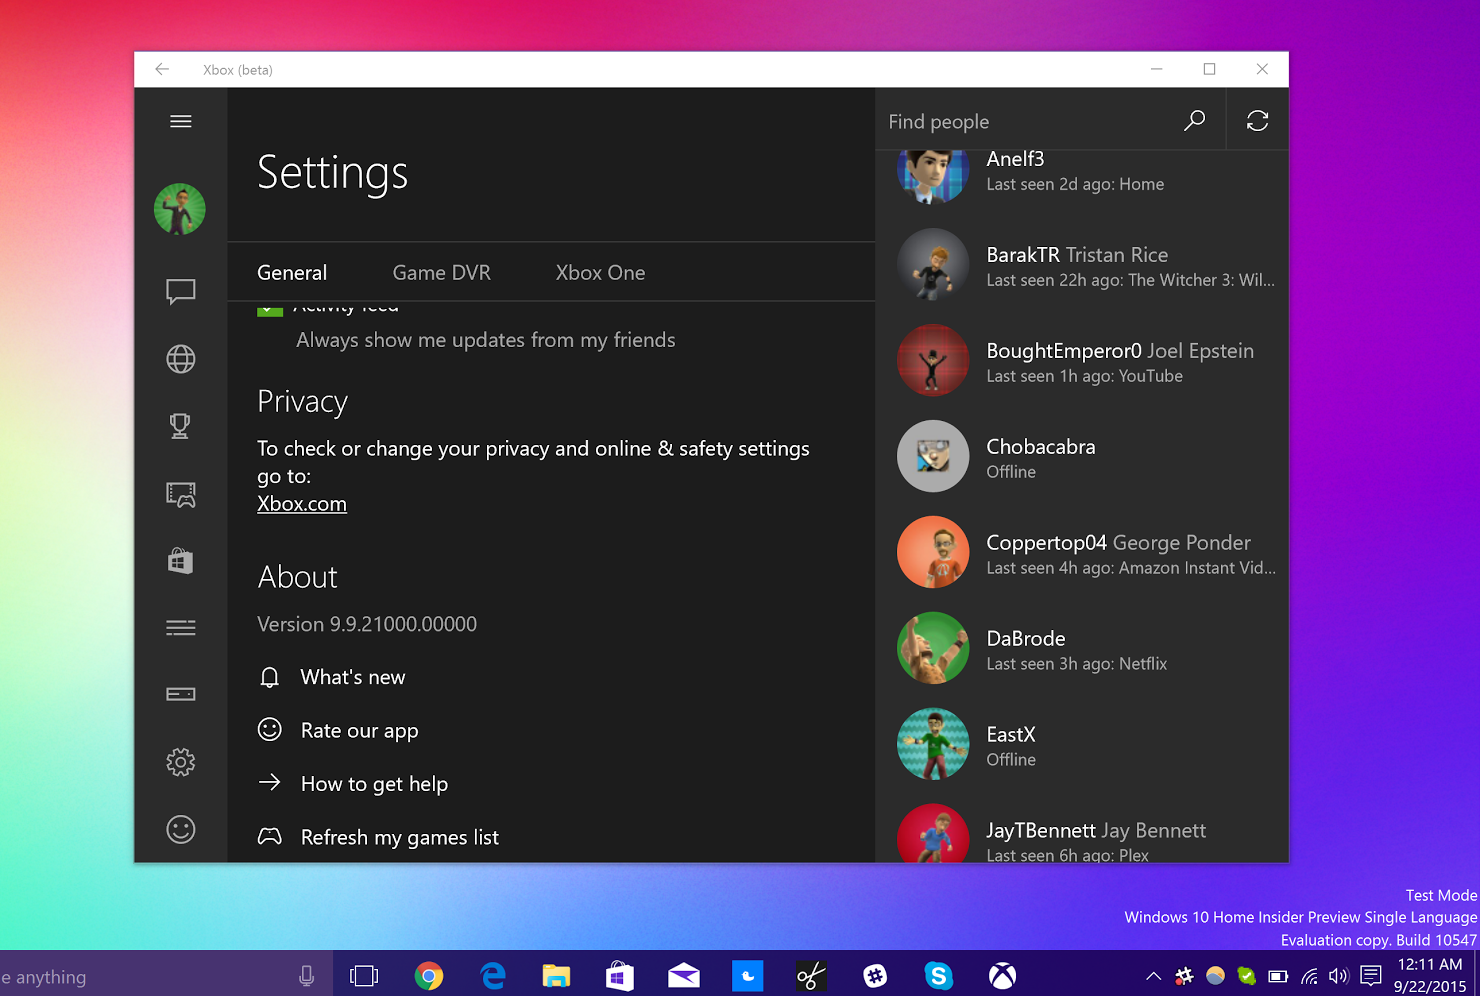 Xbox (beta) for Windows 10 updated with interactive notifications